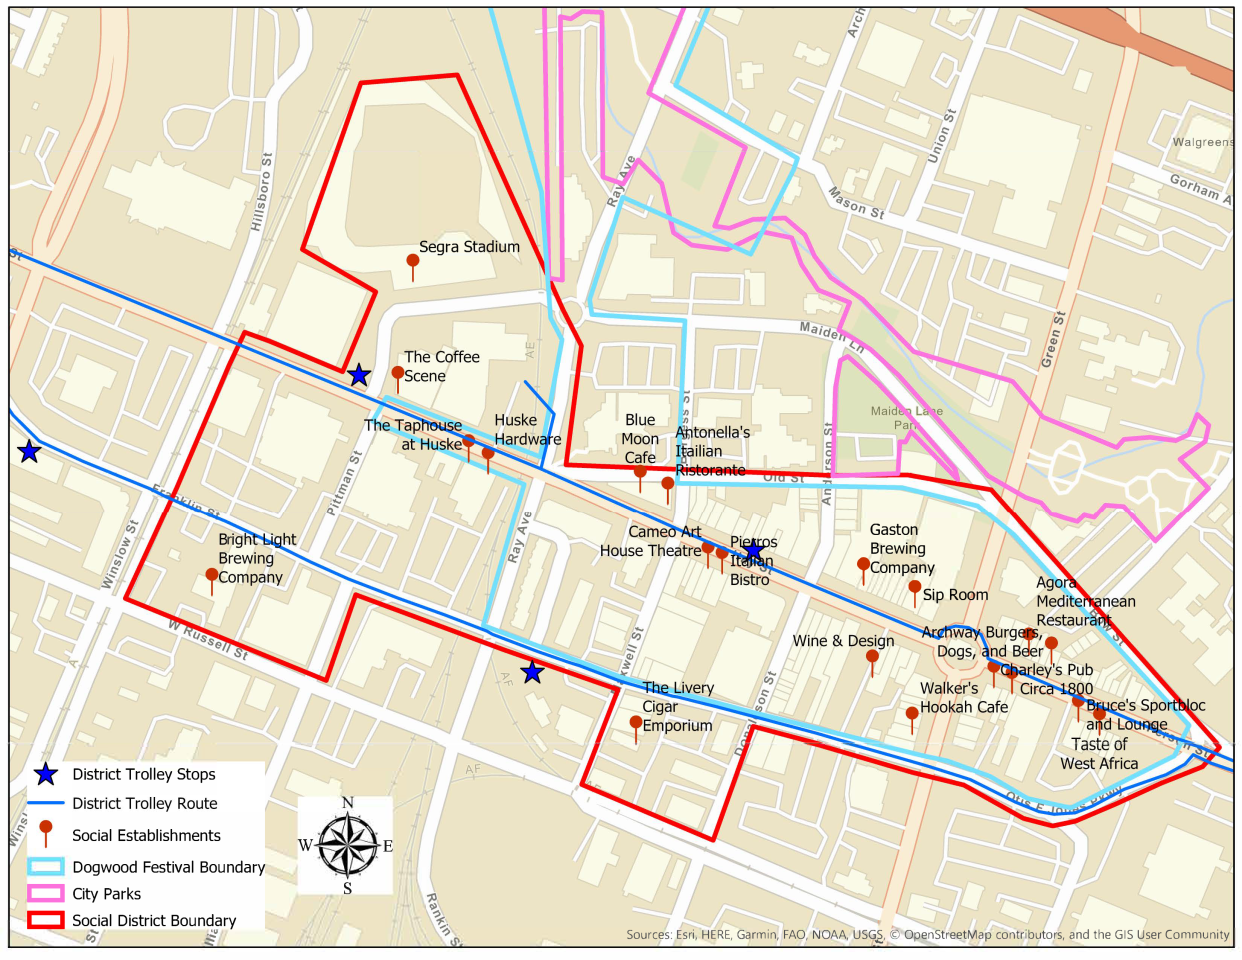 The red line on this map of downtown Fayetteville shows the boundary of a proposed "social district" where people would be allowed to move about and drink alcoholic beverages on the sidewalks and streets, without staying in a bar or restaurant.